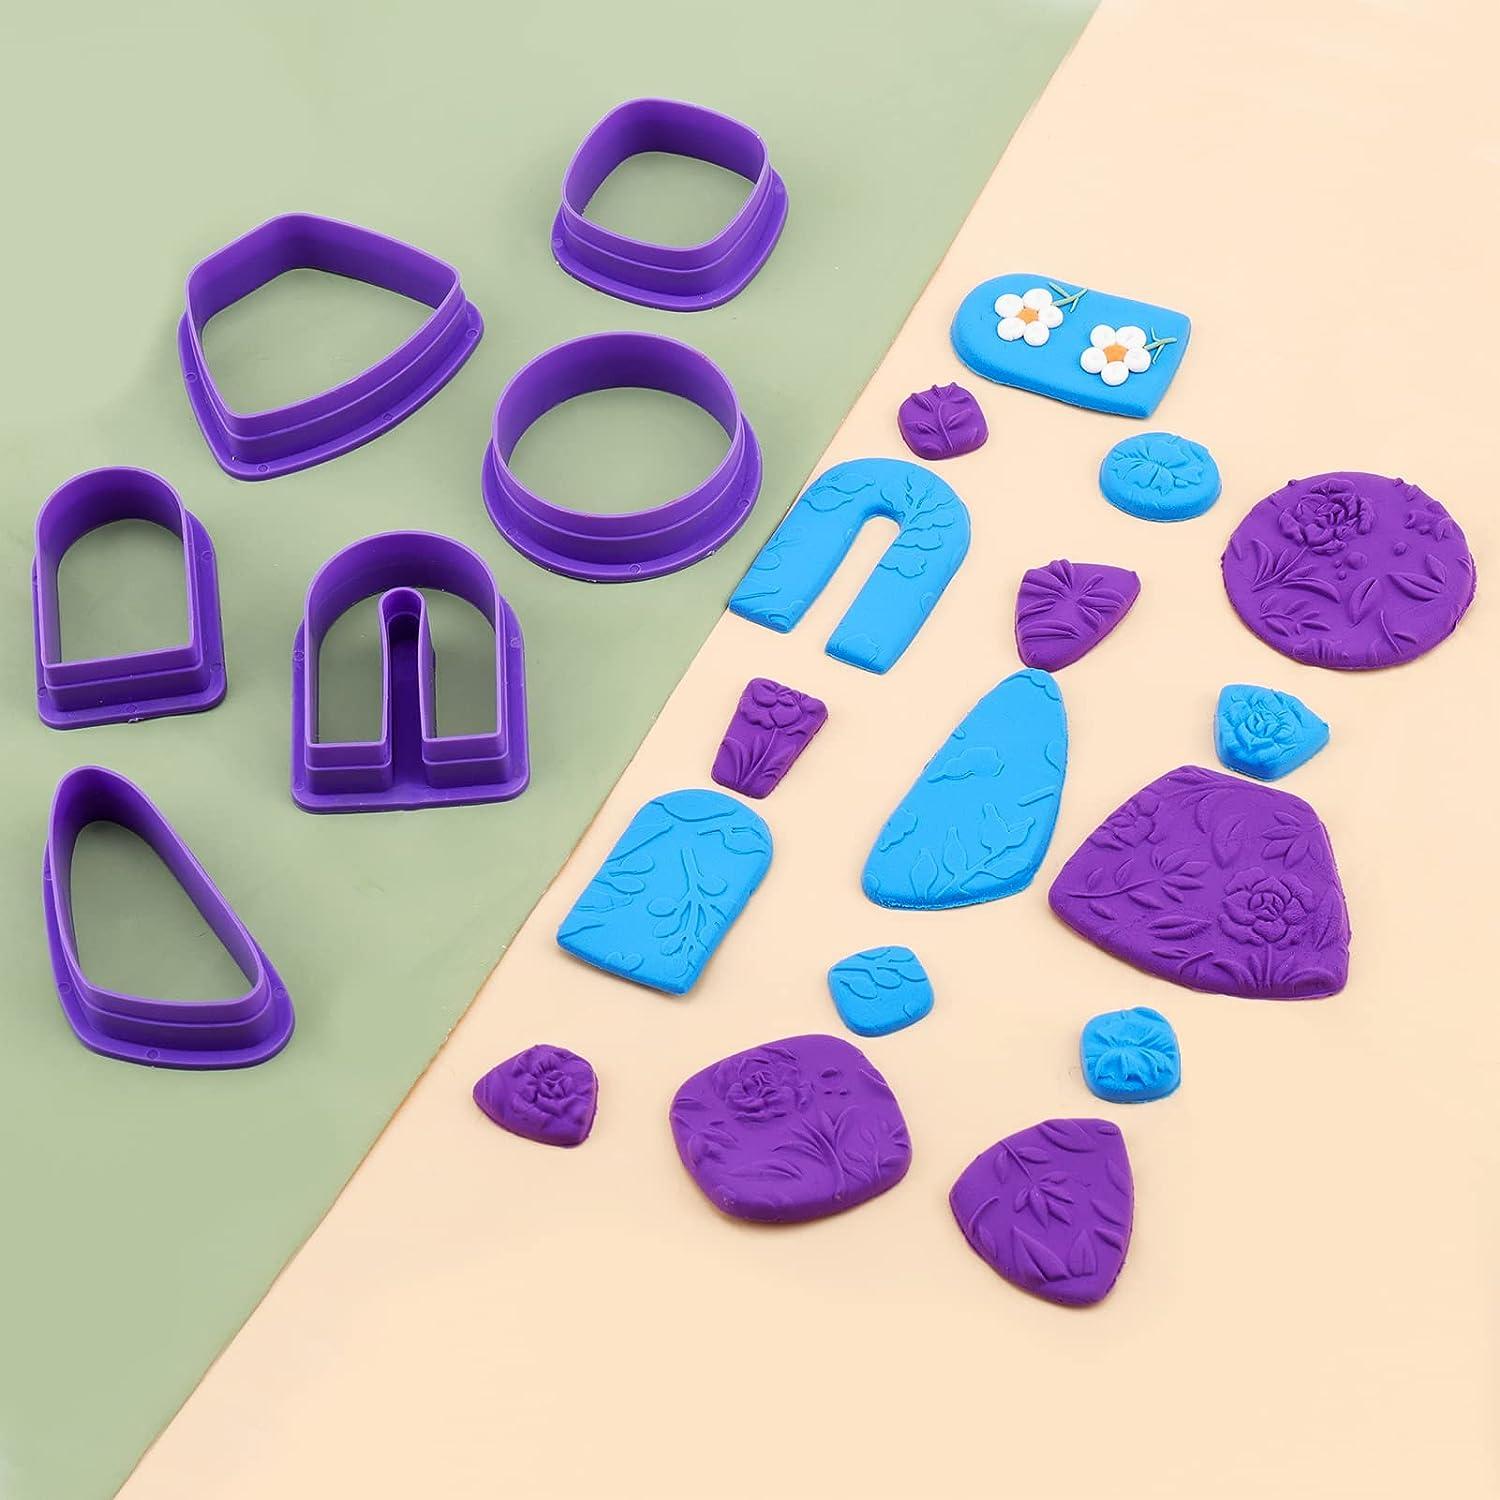 PolymerClay Cutters Clay Earring Making Kit For Earrings Jewelry Making  Clay Earring Cutters With Earring Cards For DIY Craft